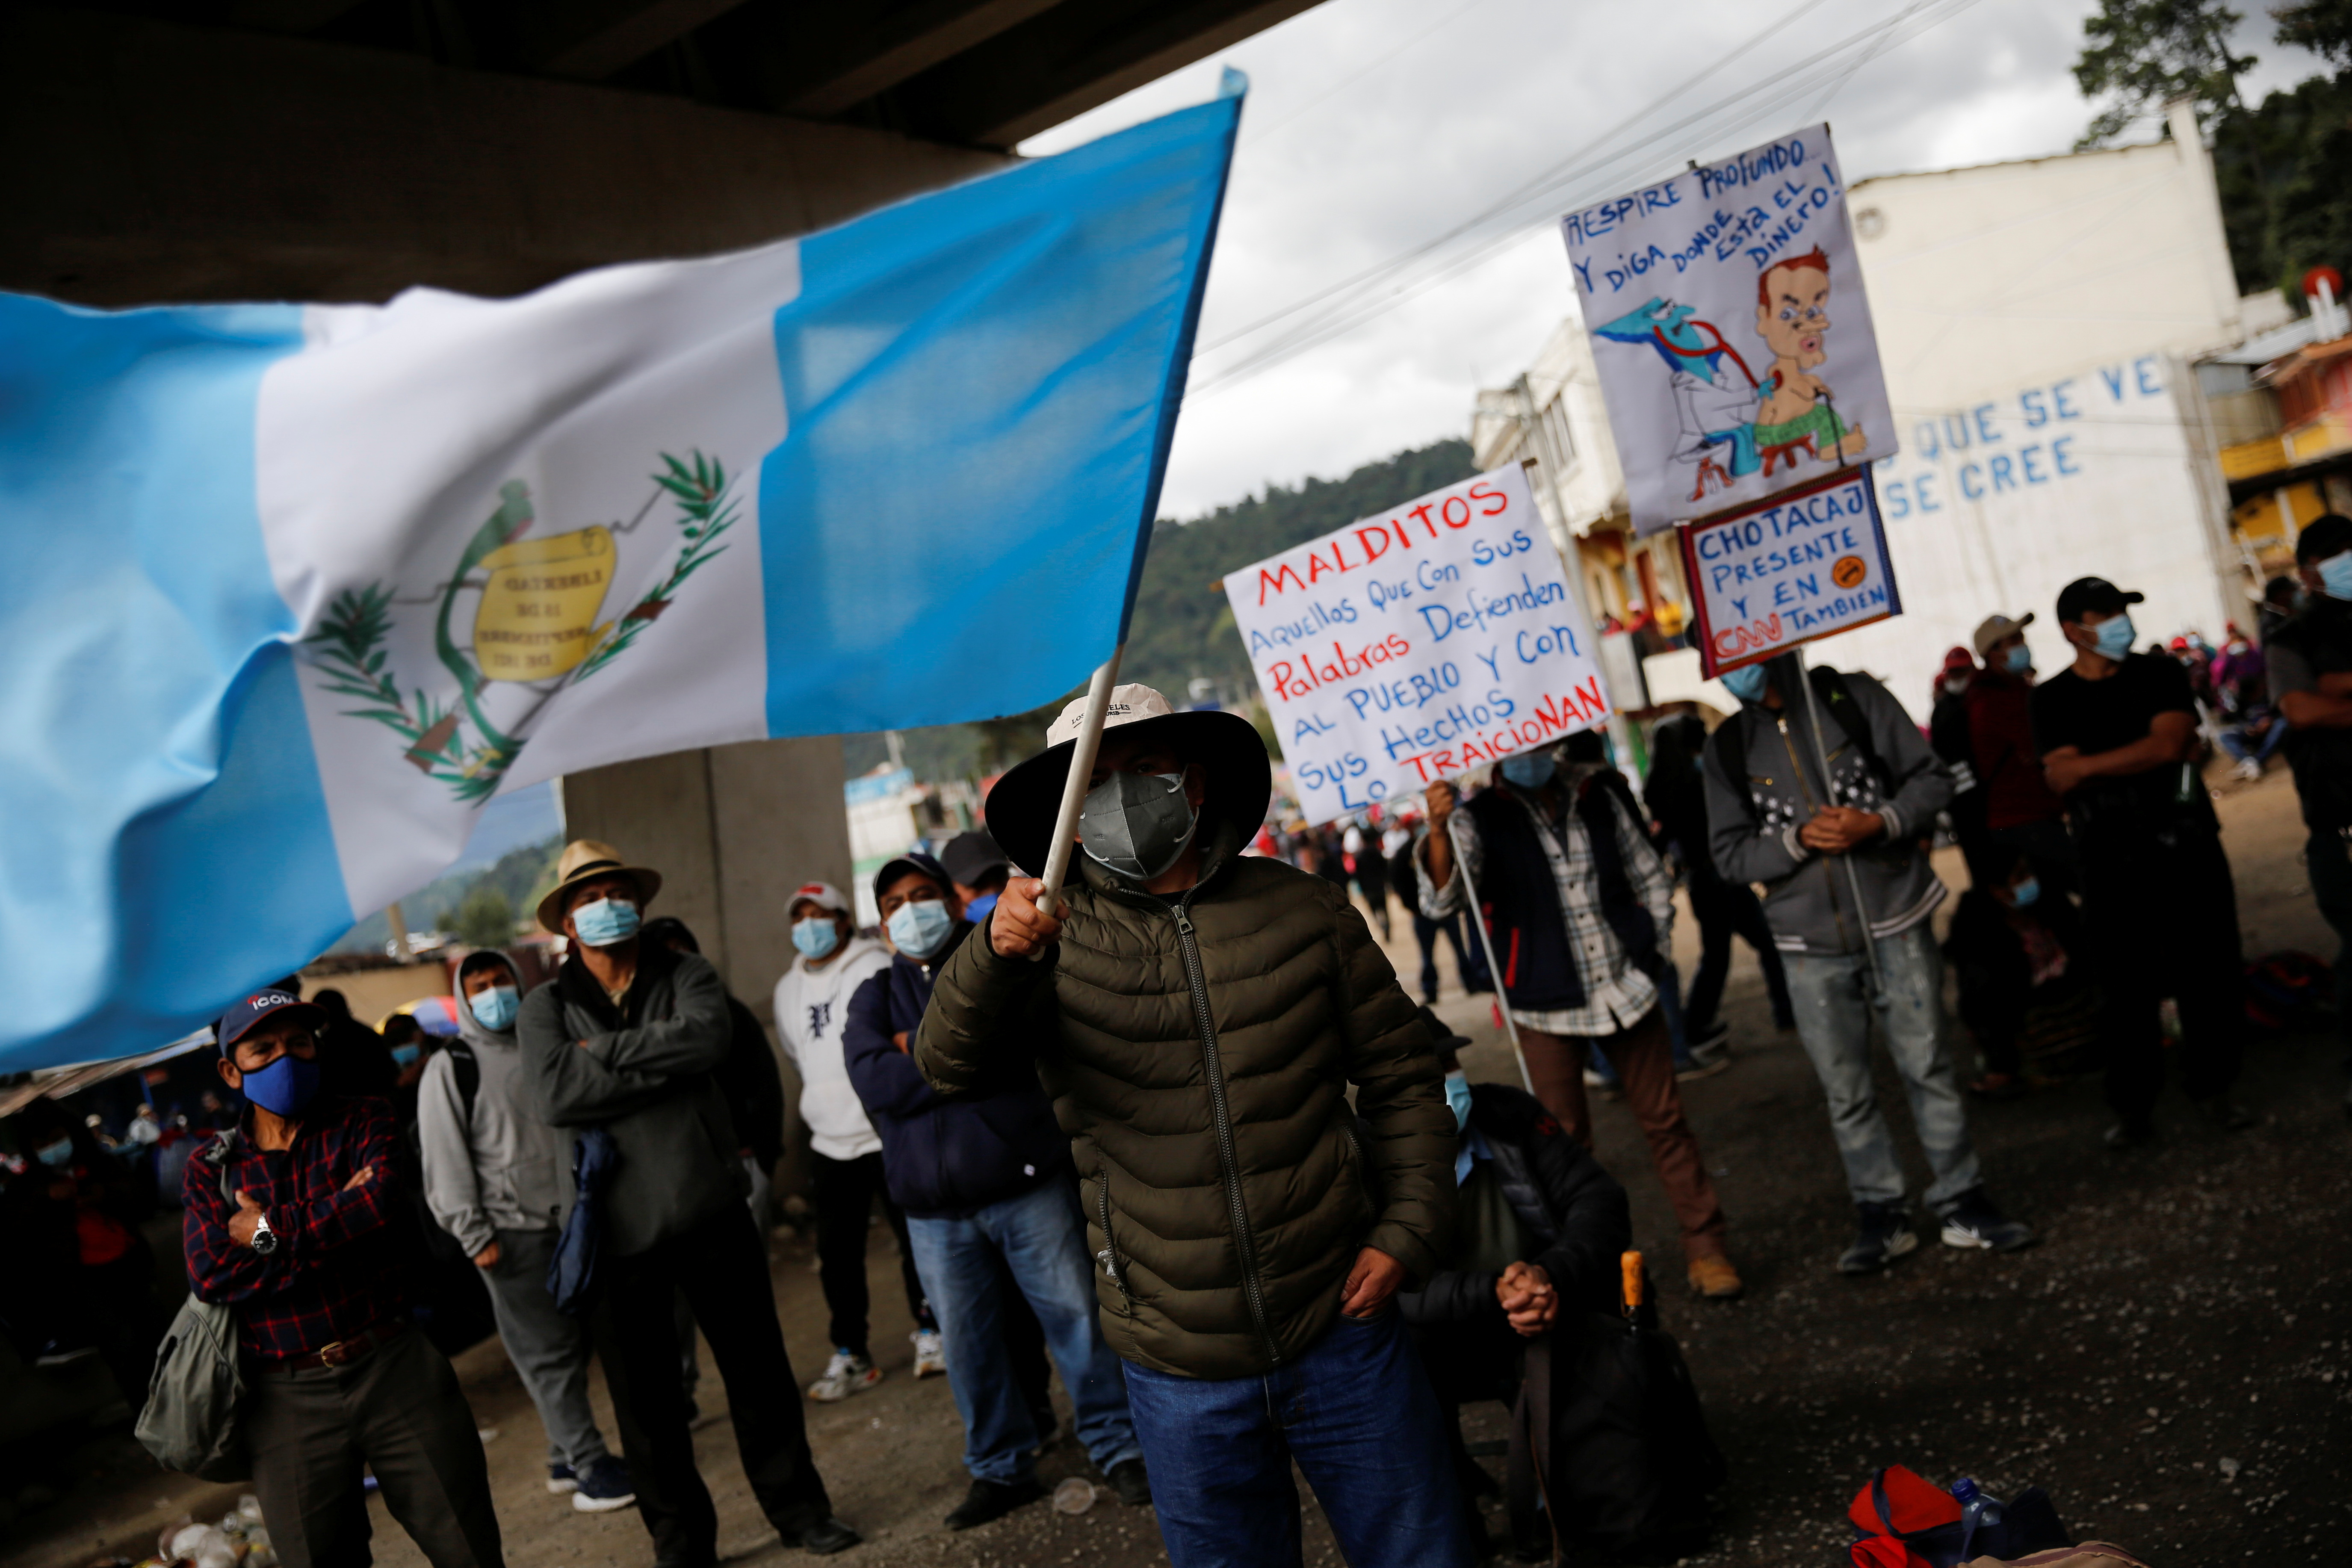 A Mayan indigenous man waves a Guatemala flag during a protest to demand the resignation of Guatemalan President Alejandro Giammattei and Attorney General Maria Porras, in San Cristobal Totonicapan, Guatemala July 29, 2021. REUTERS/Luis Echeverria